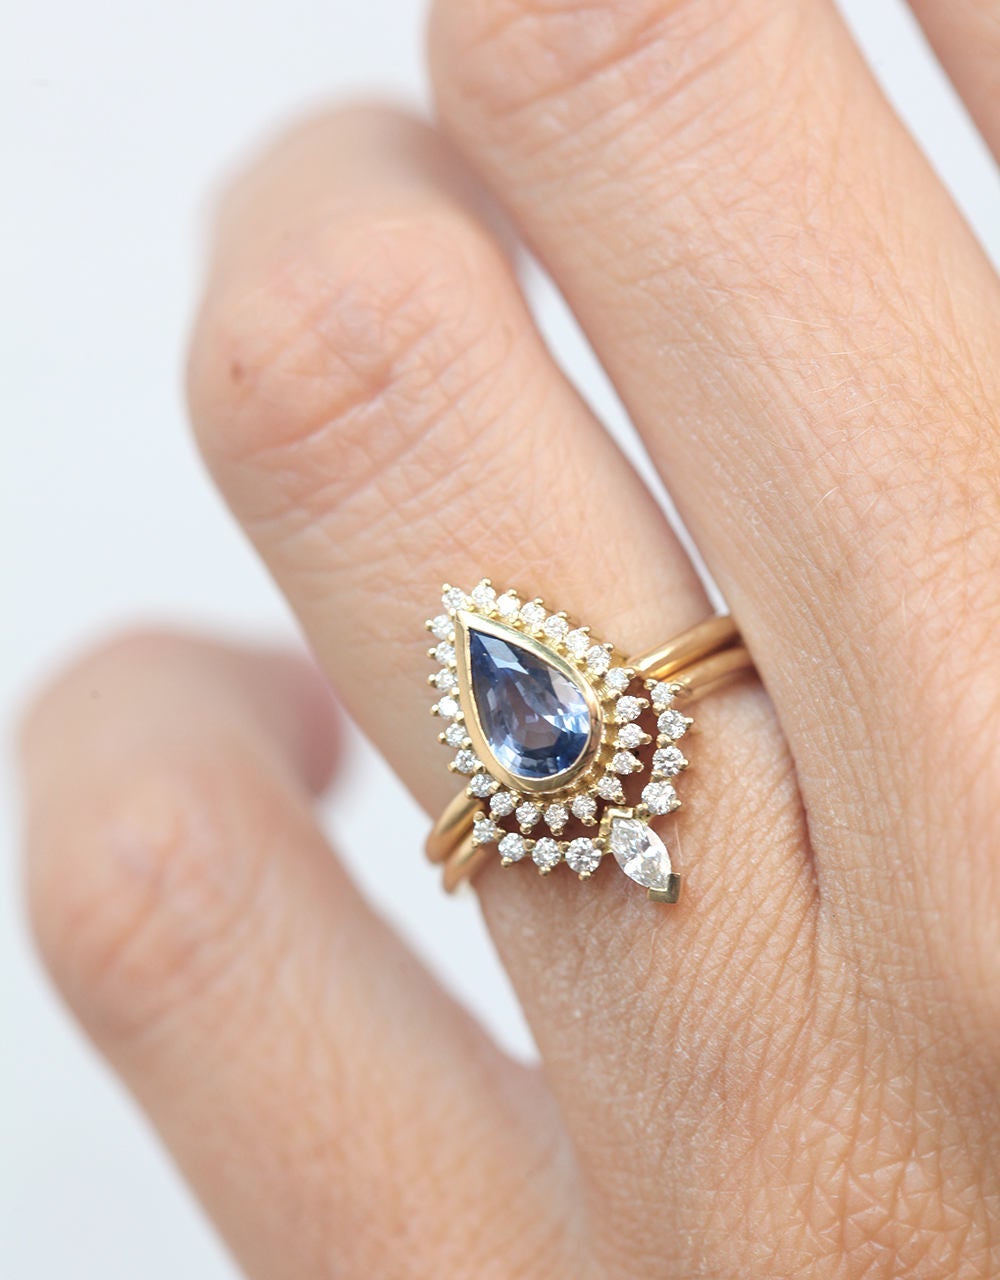 Pear-shaped blue sapphire ring with diamond halo